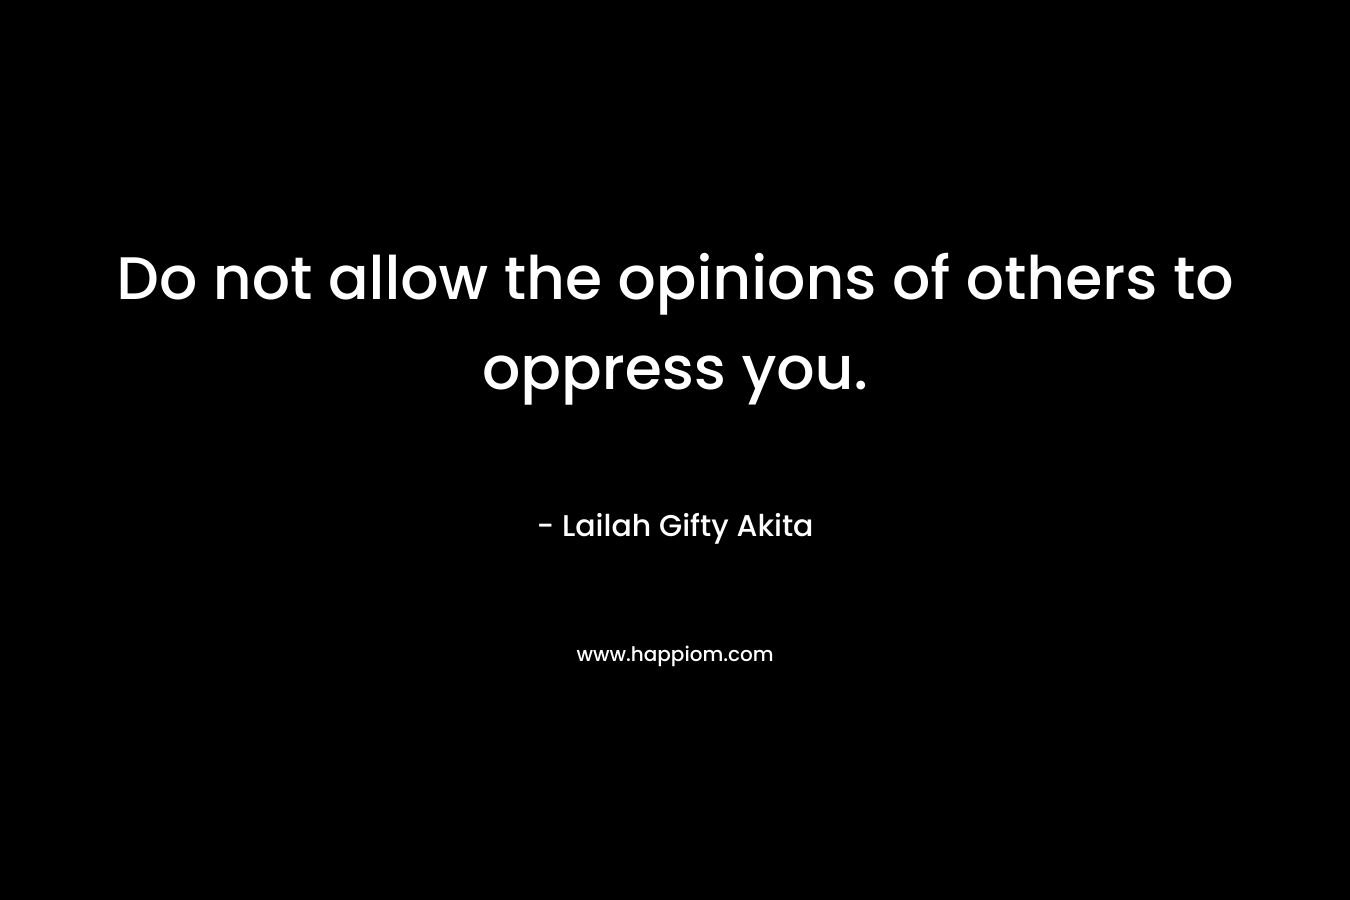 Do not allow the opinions of others to oppress you.